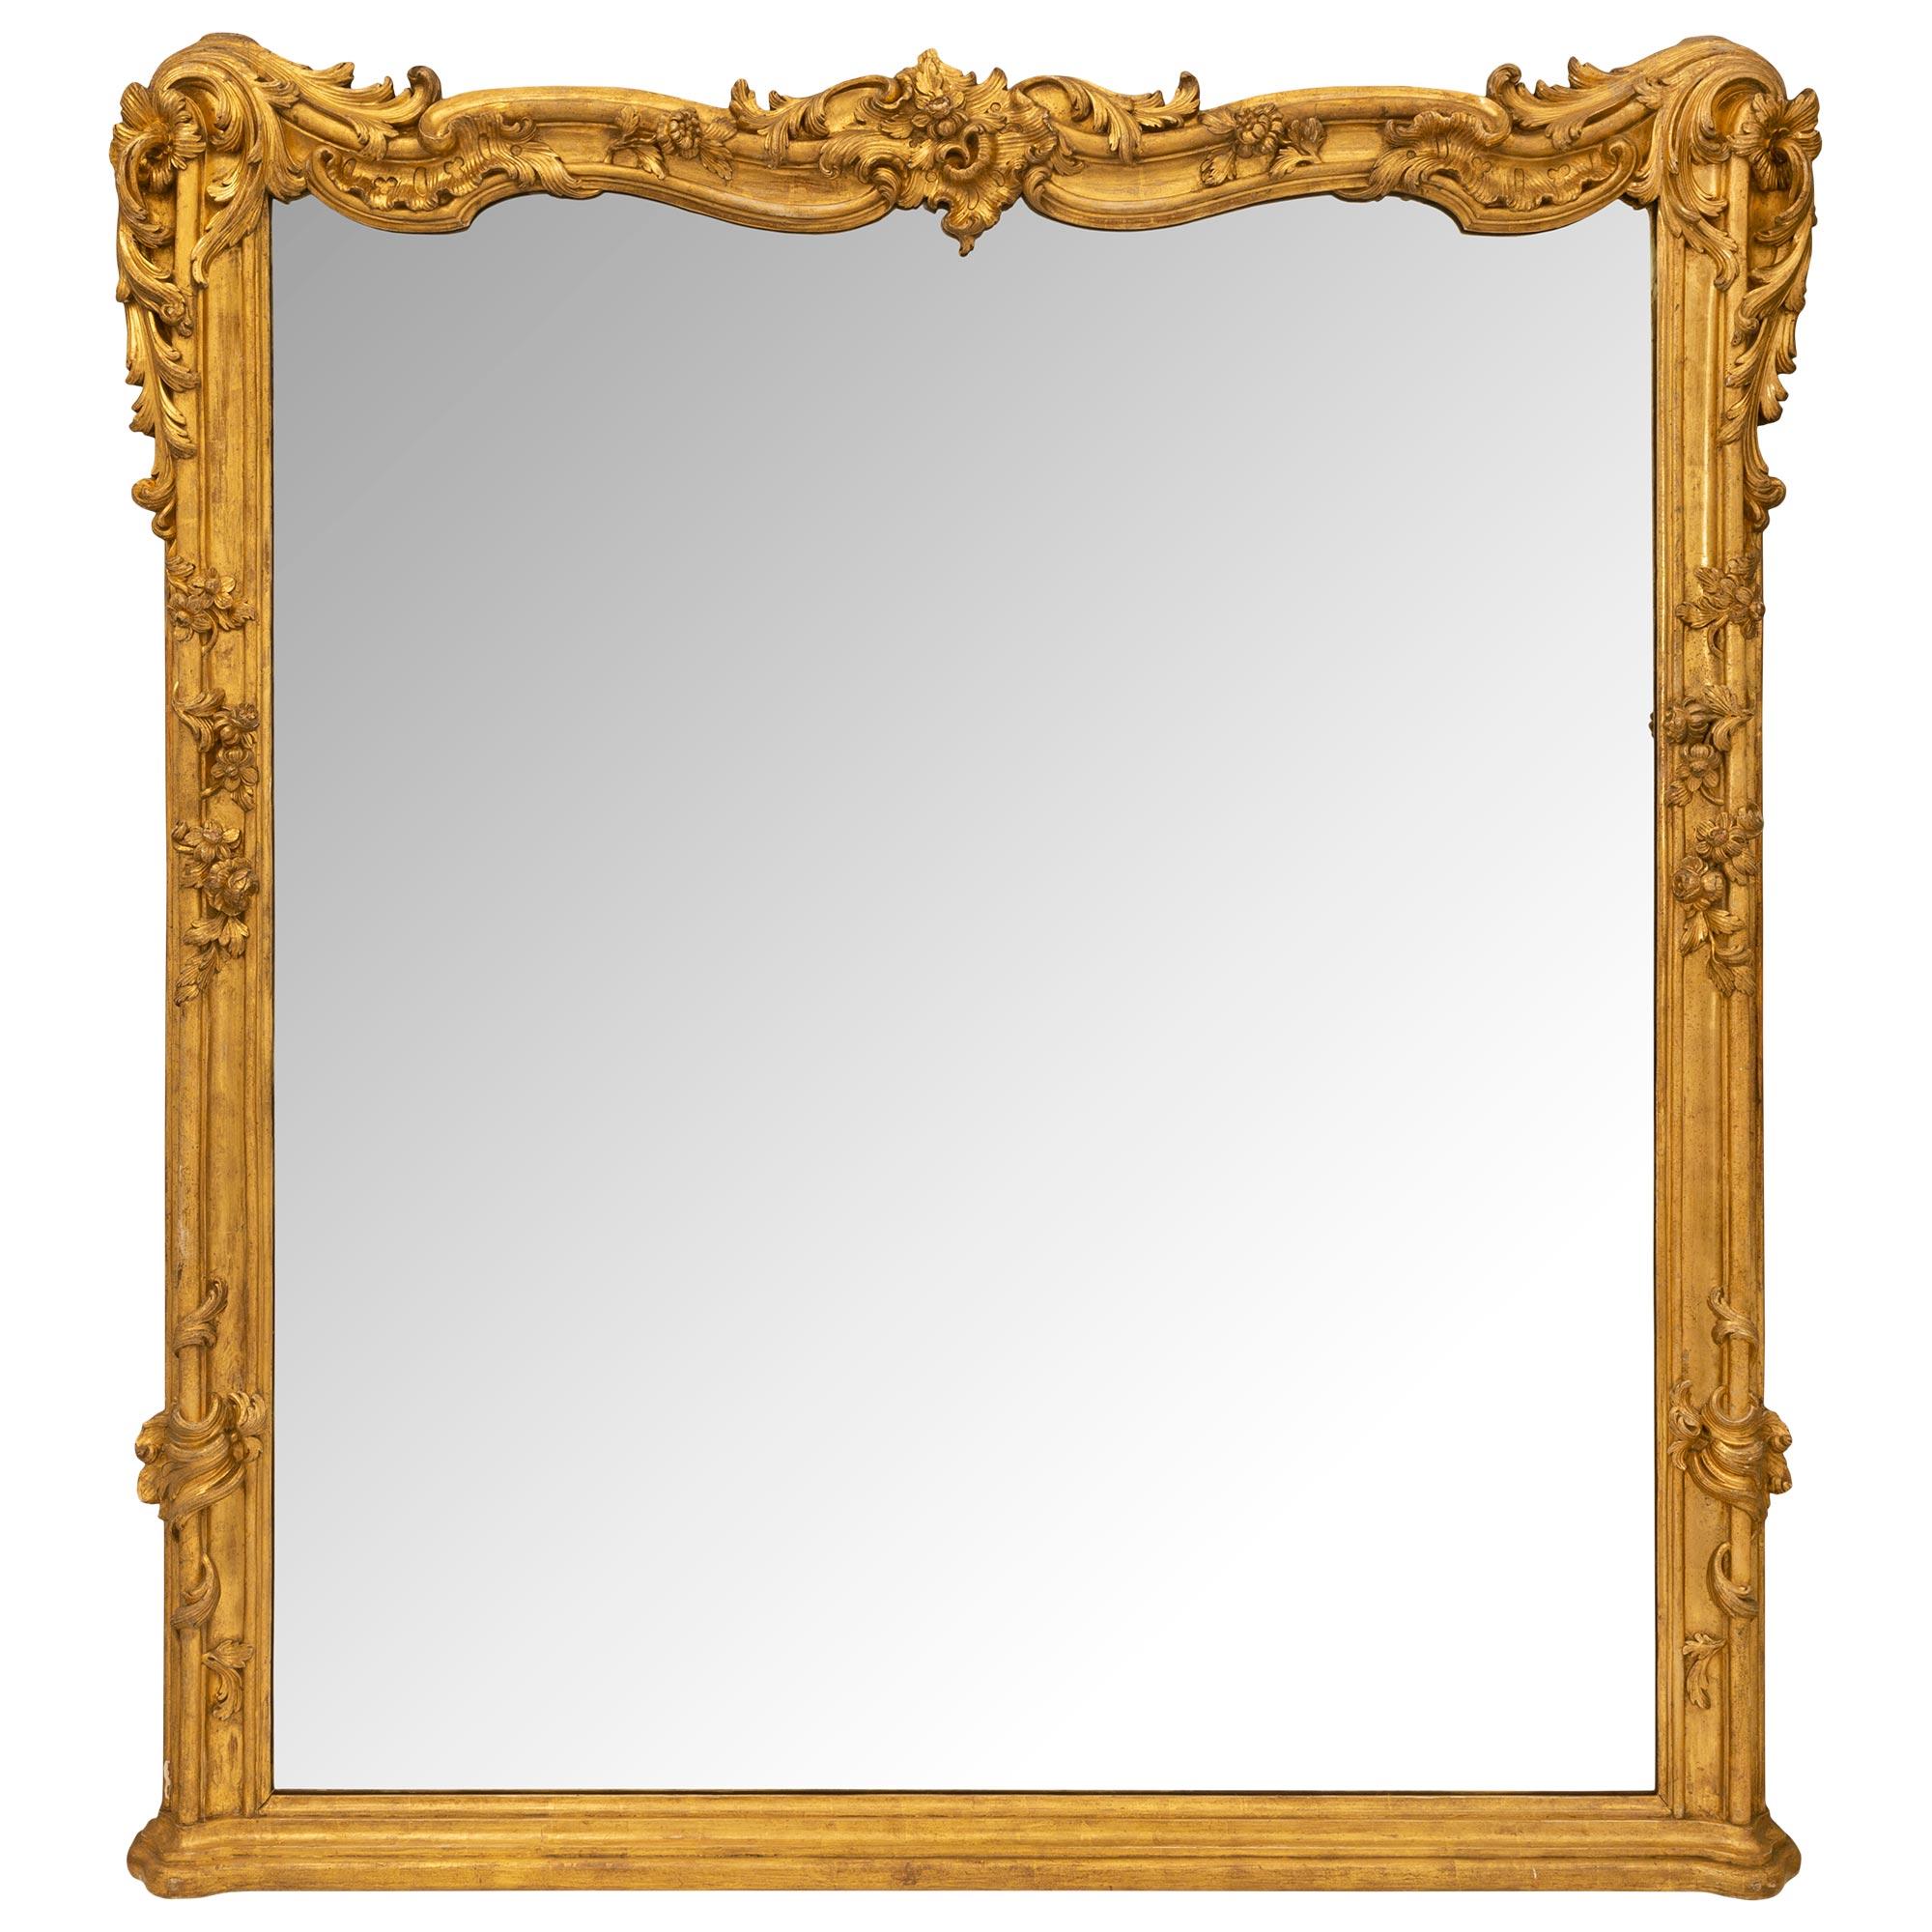 An impressive and unique Italian 19th century Louis XV st. finely carved mecca mirror. The original mirror plate within a mecca frame and has a mottled straight base and sides. Each side displays charming reeded foliate patterns with finely carved